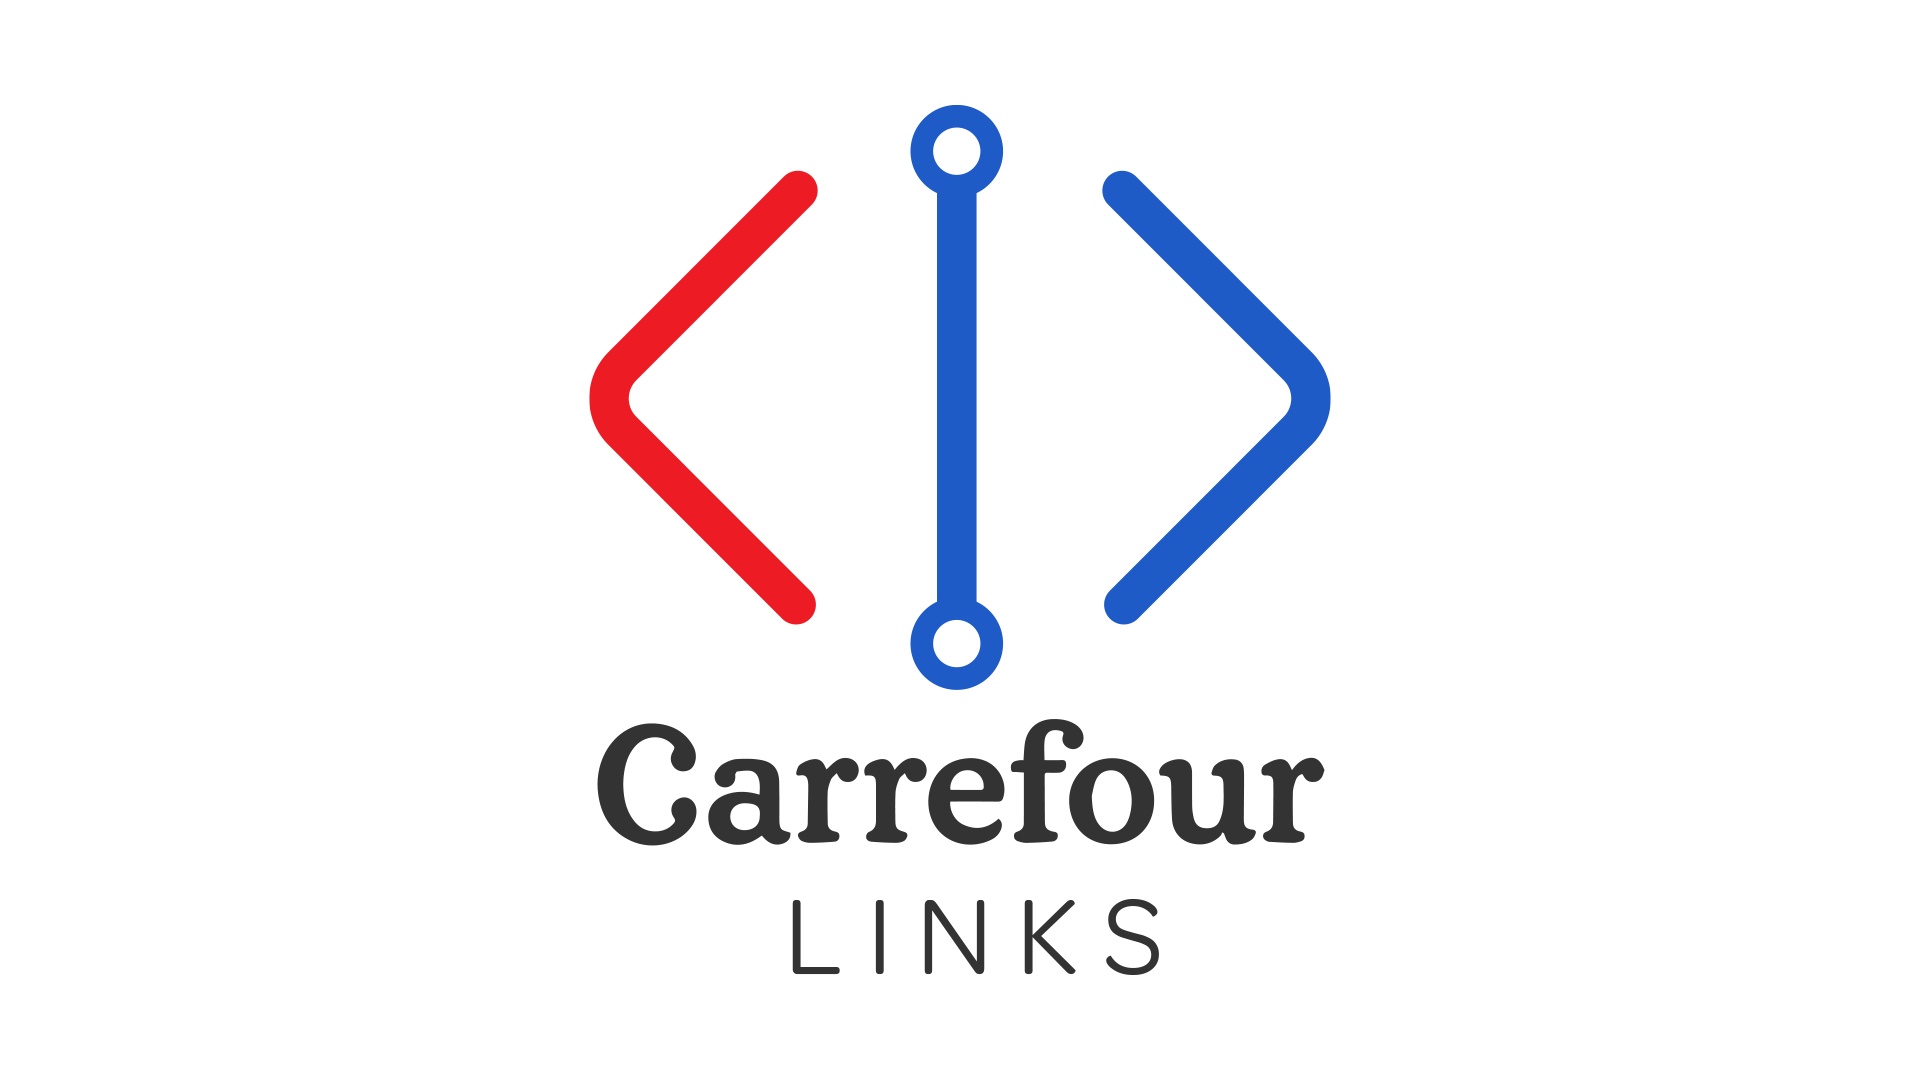 Carrefour introduces ads in their websites and apps in 9 countries